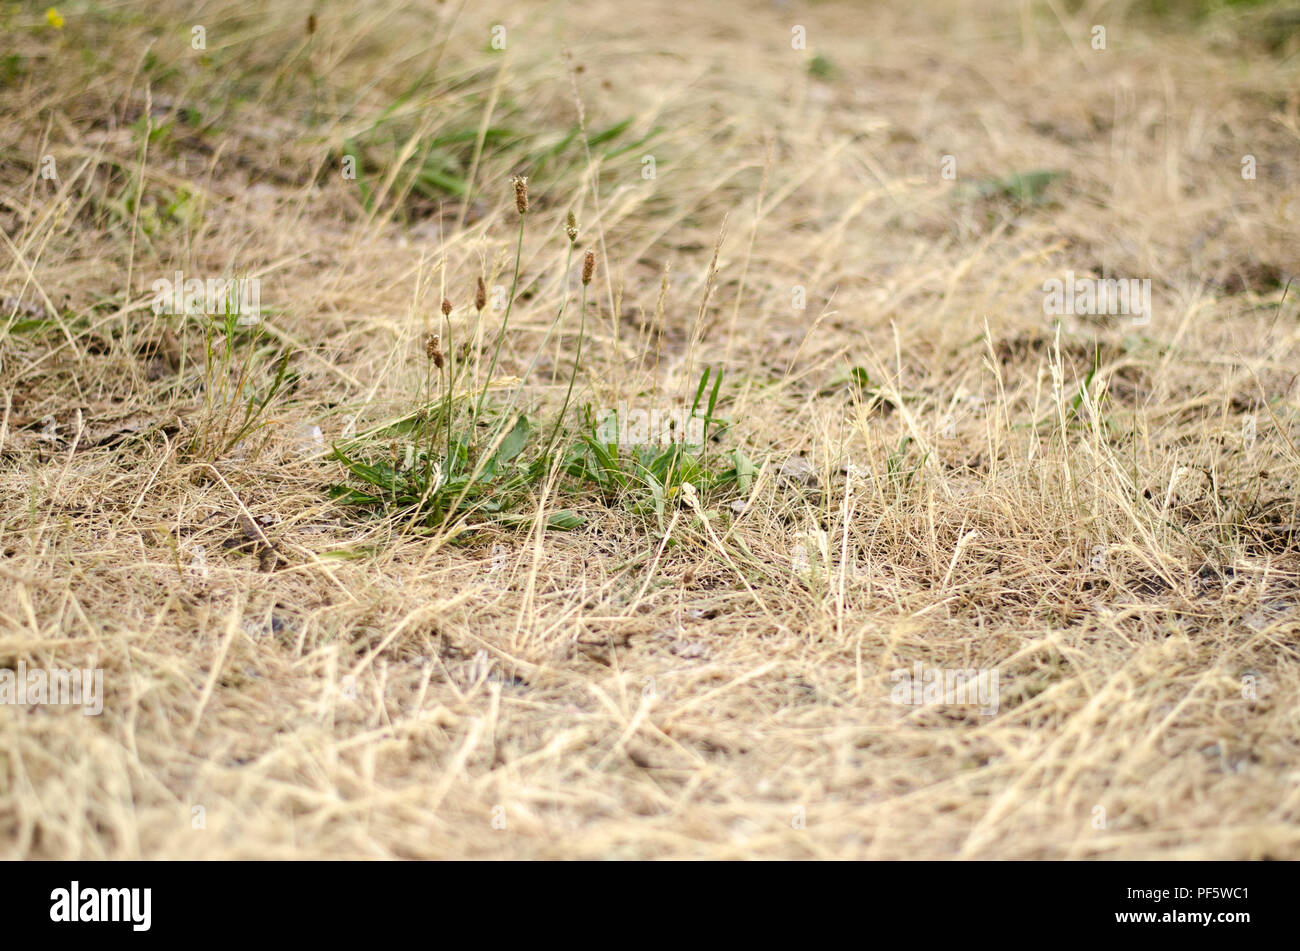 Dry grass during a drought with some green plants still. Stock Photo